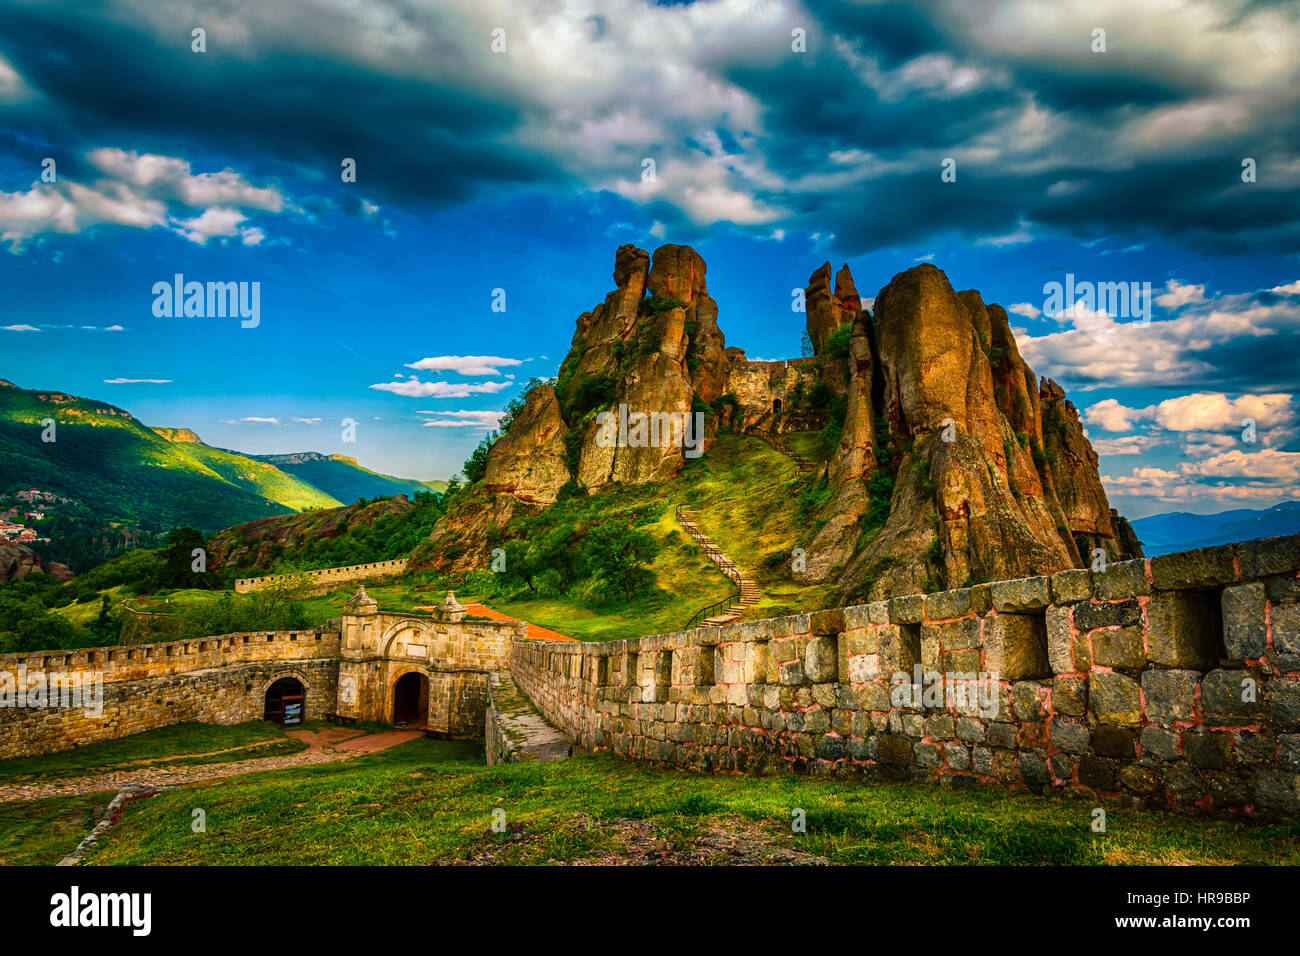 The Belogradchik Fortress, also known as Kaleto, is an ancient fortress in the the town famous for its unique and impressive rock formations. Stock Photo